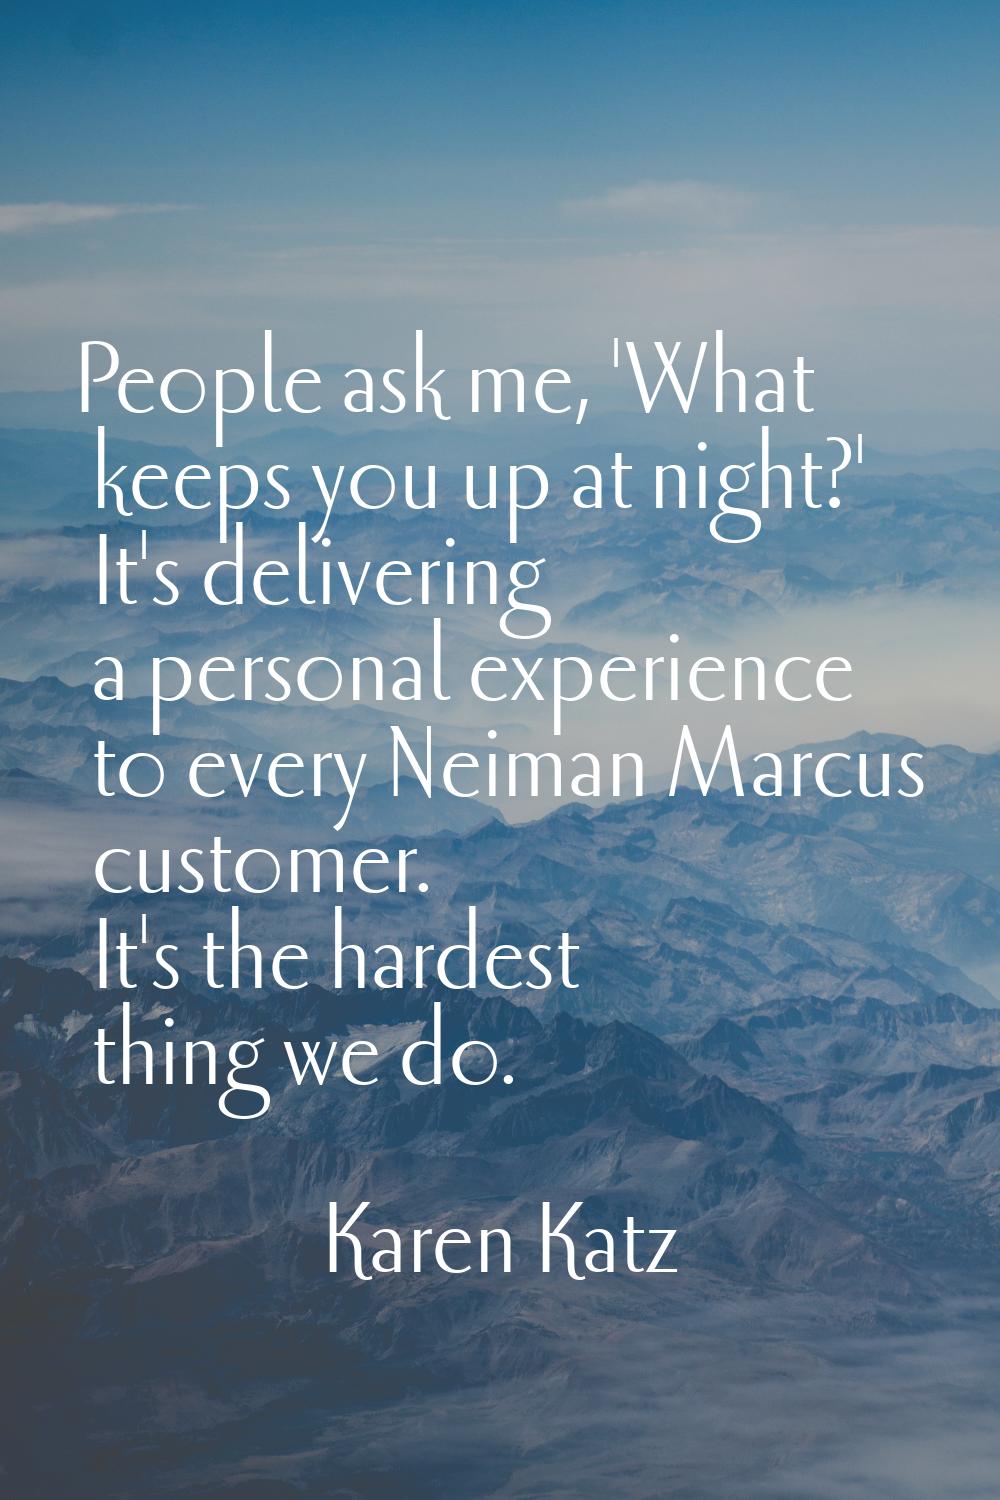 People ask me, 'What keeps you up at night?' It's delivering a personal experience to every Neiman 